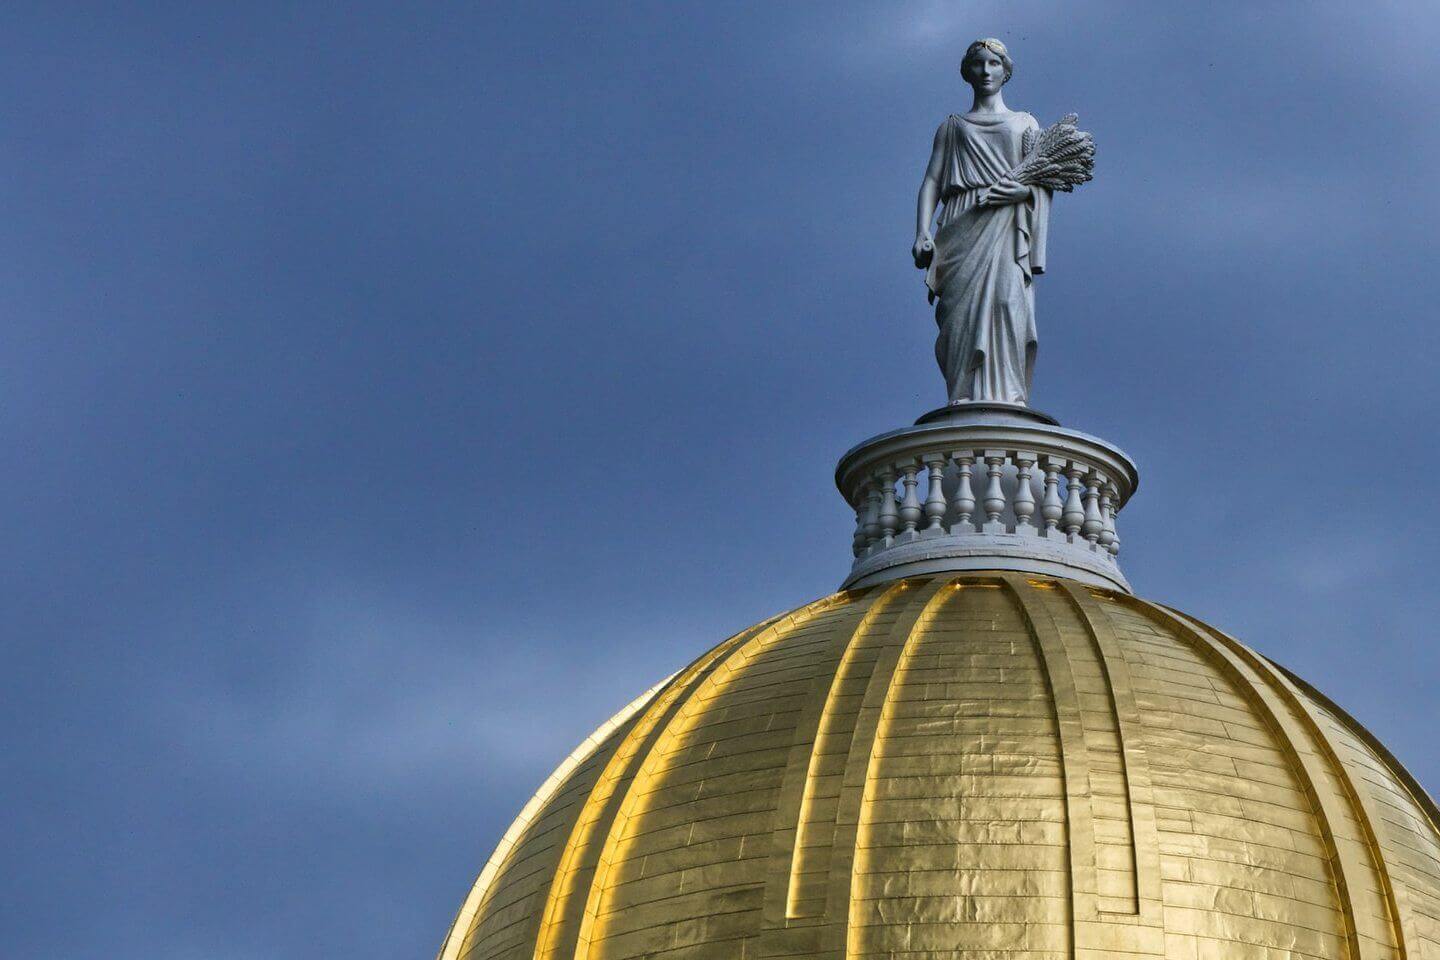 Gold leafed dome of the Vermont State House against blue sky with carved wooden statue of the Goddess Ceres.